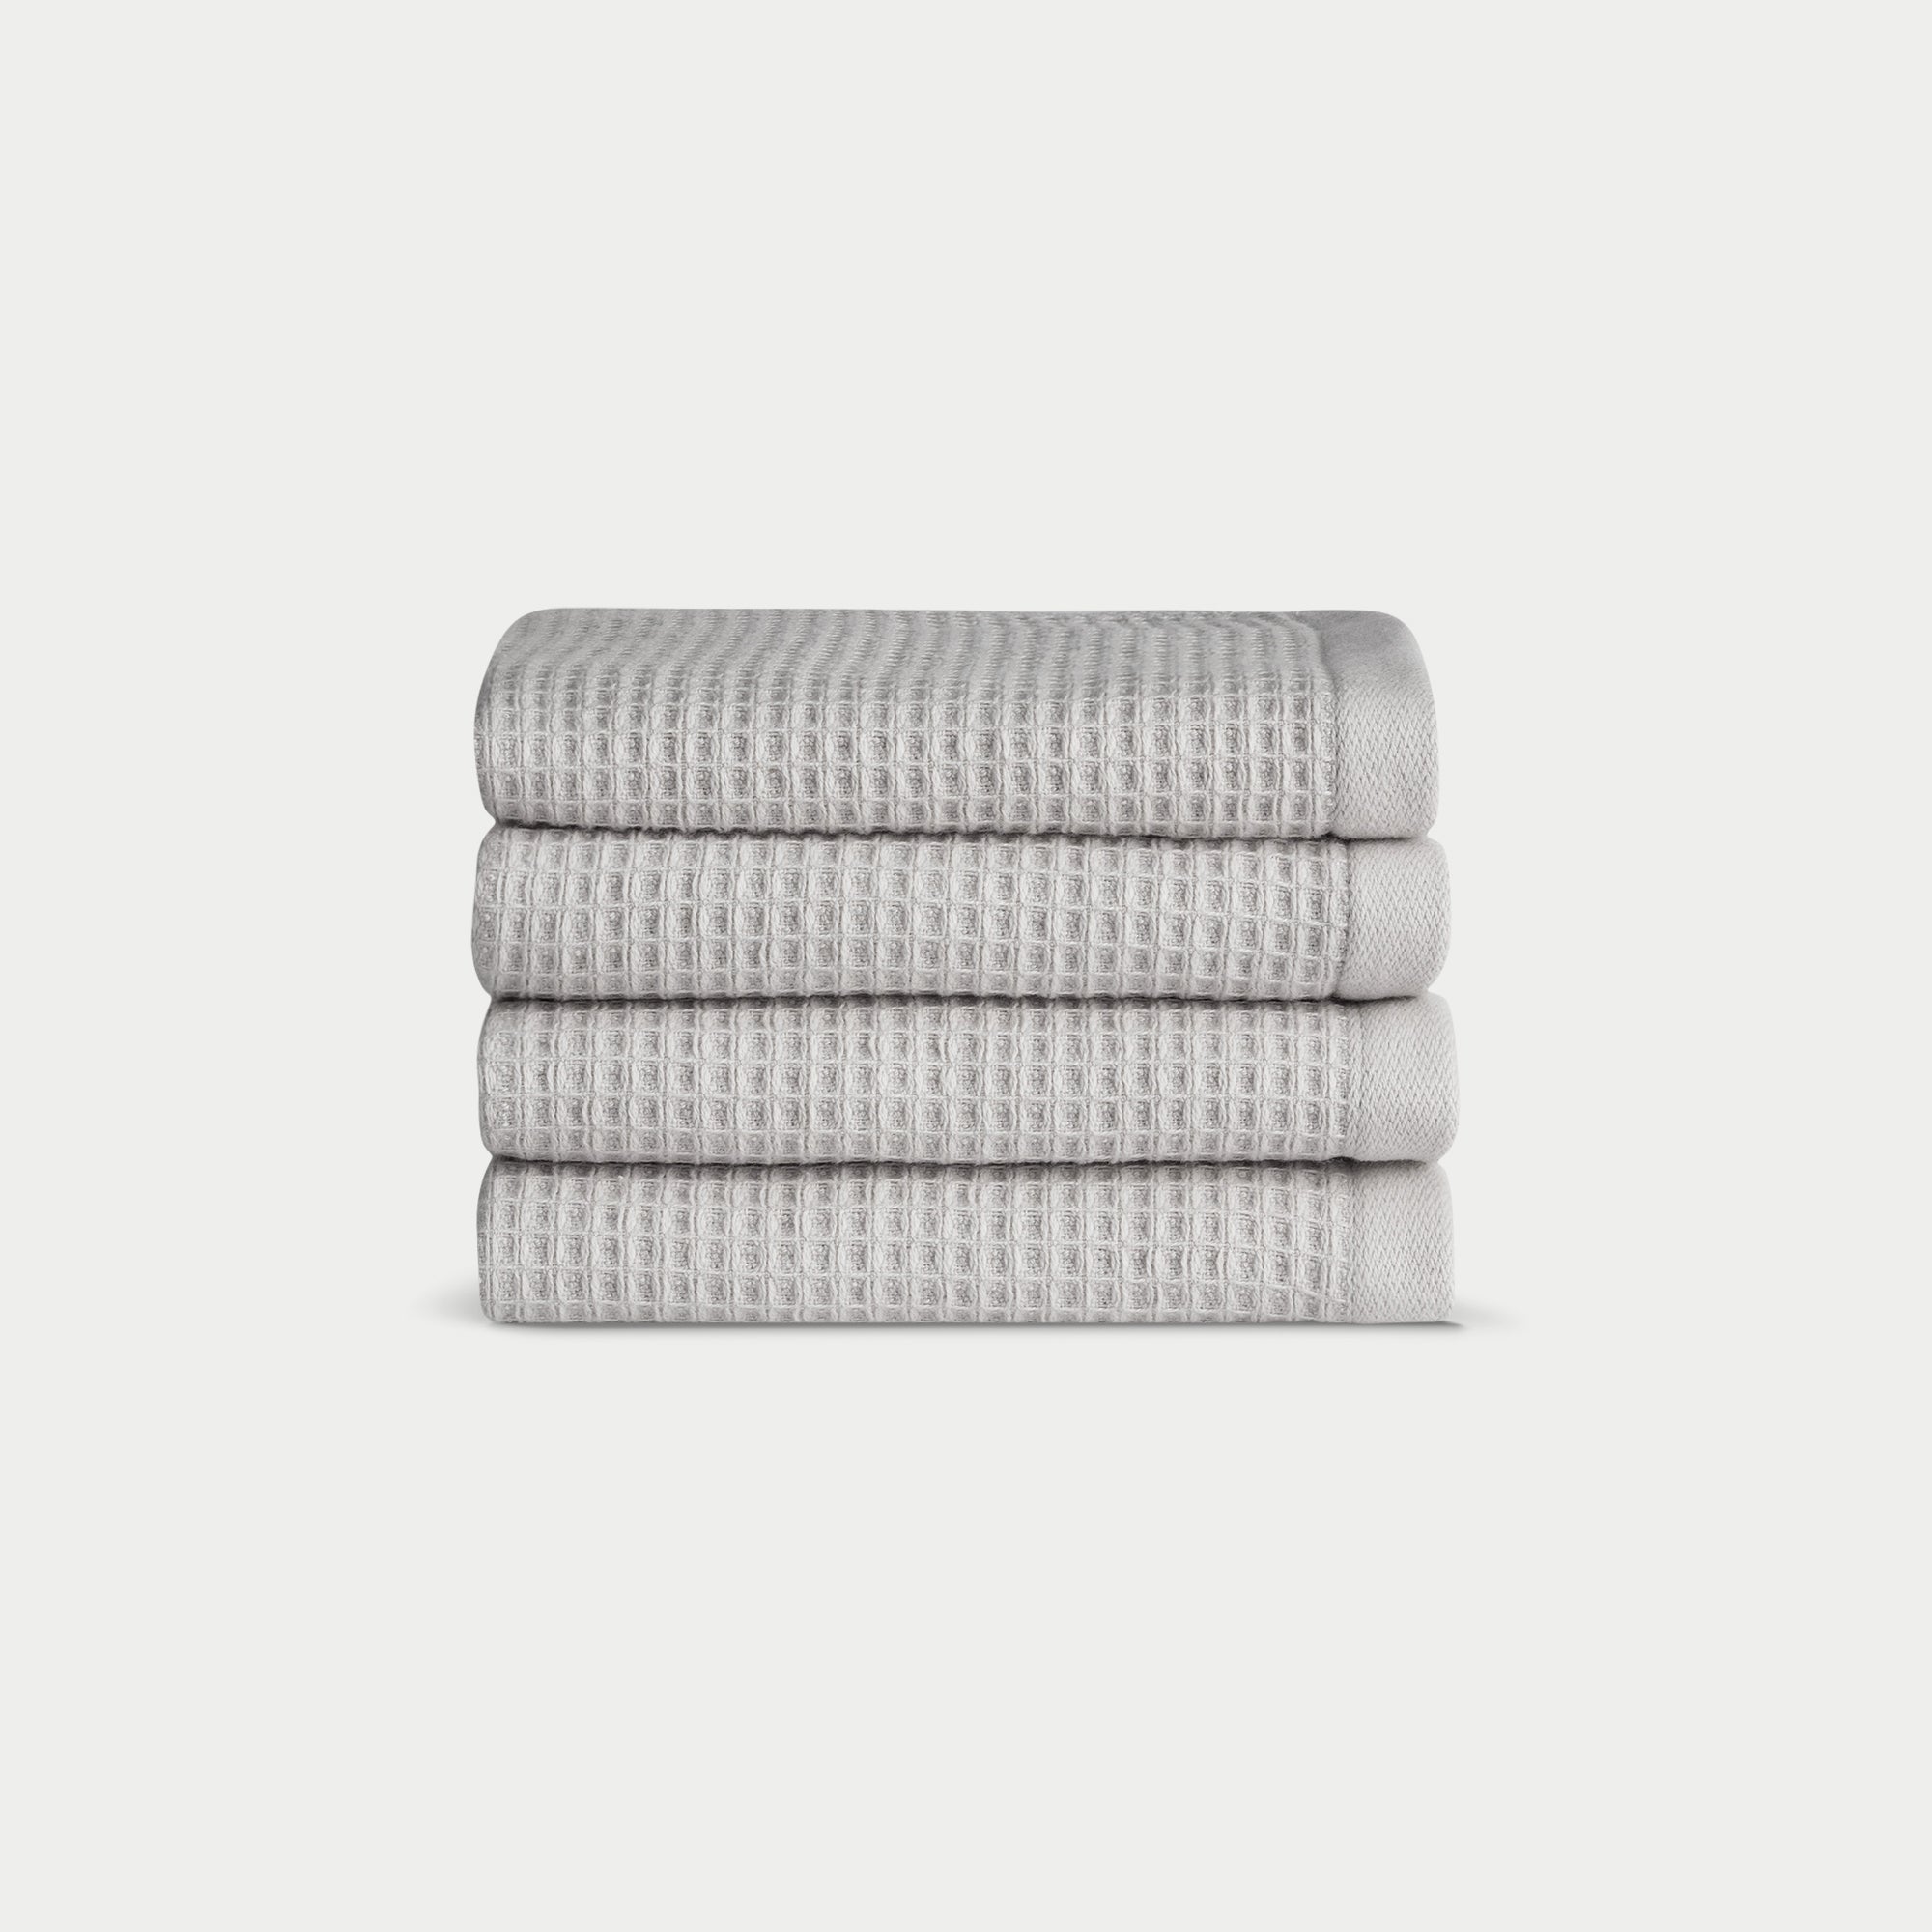 Light Grey Waffle Wash Cloths neatly folded. The photo was taken with a white background. |Color:Light Grey